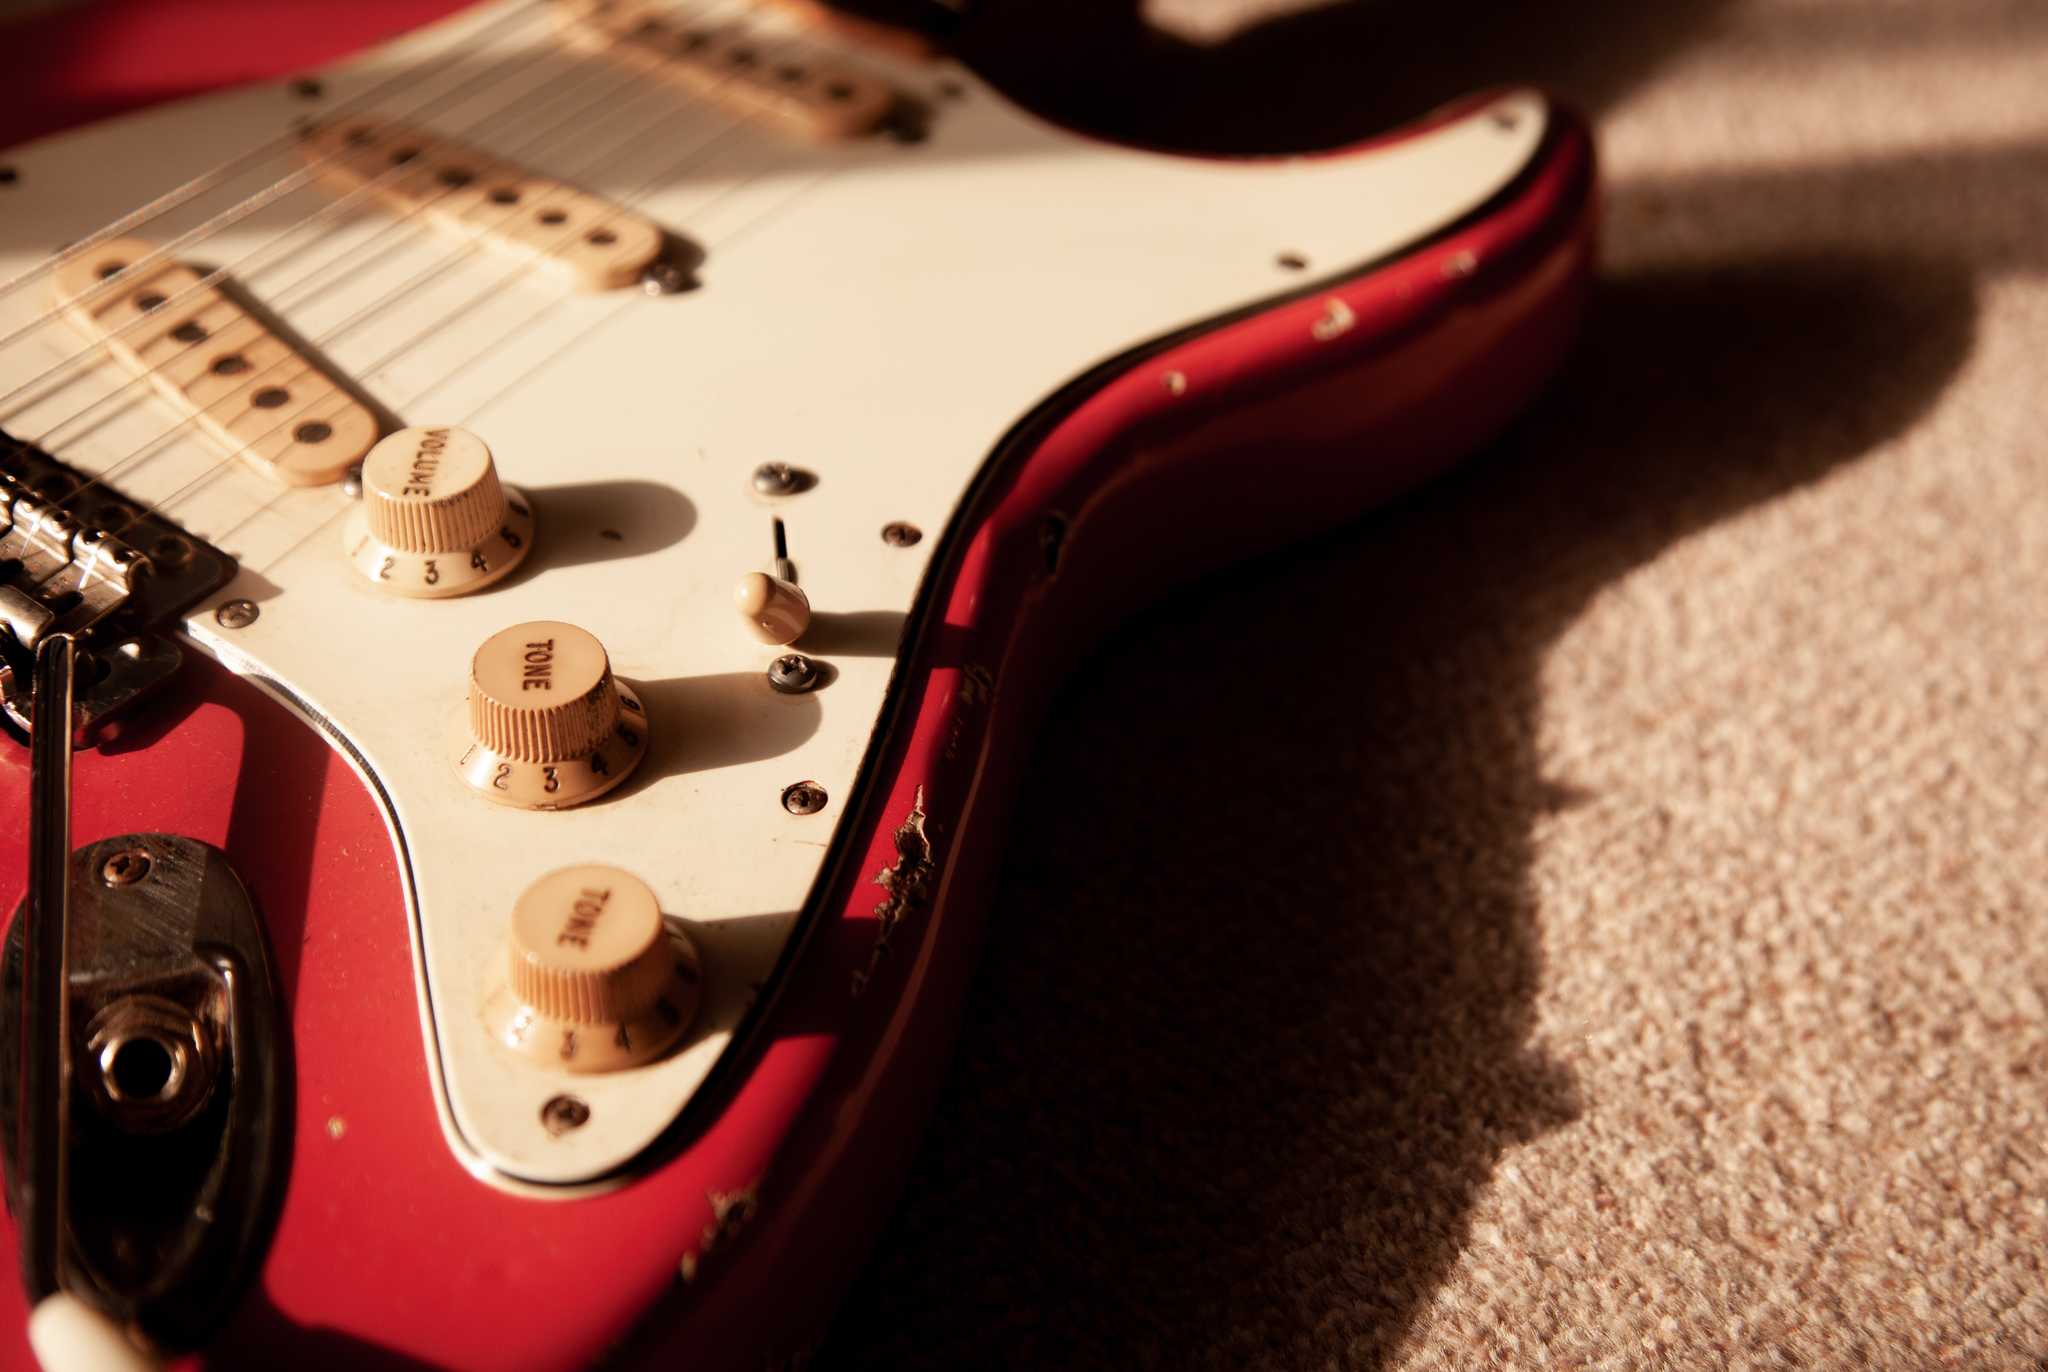 Red Relic Stratocaster